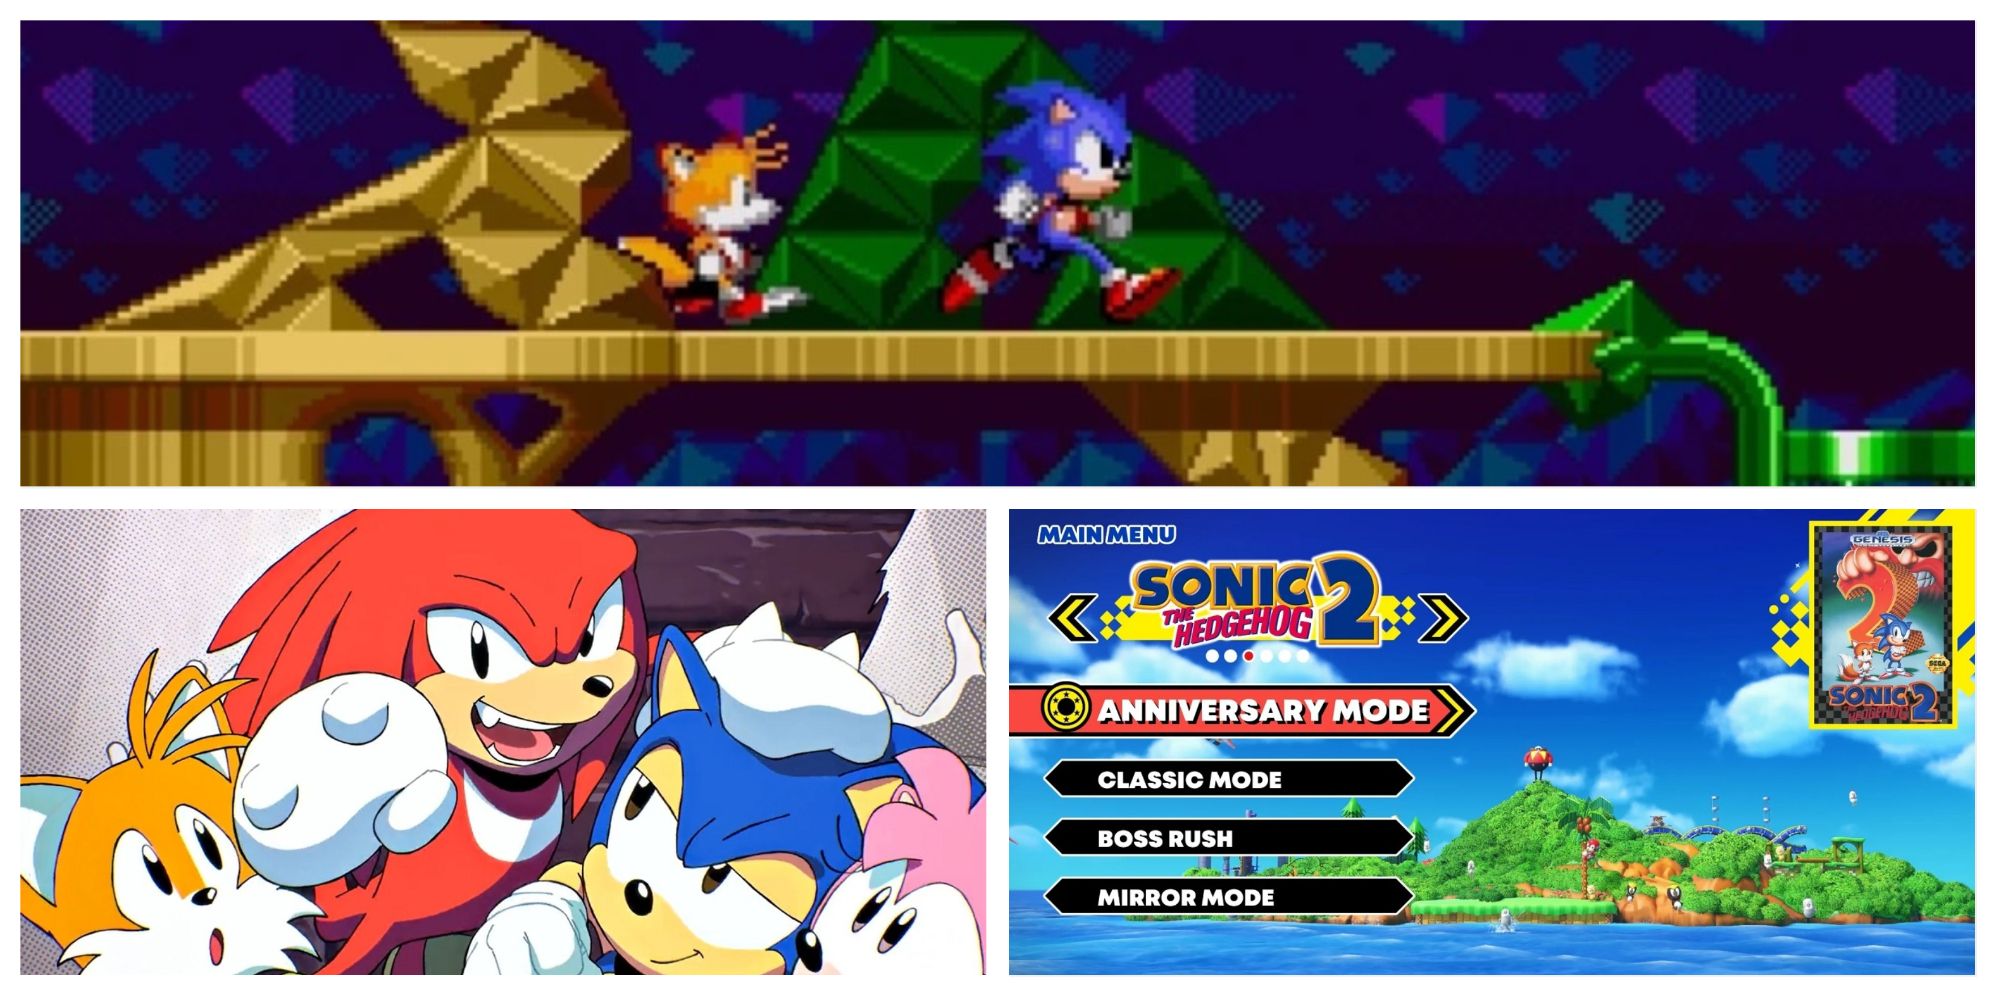 Sonic the Hedgehog 2 Cheats & Cheat Codes for PC, PS4/5, Switch, and Series  X/S - Cheat Code Central